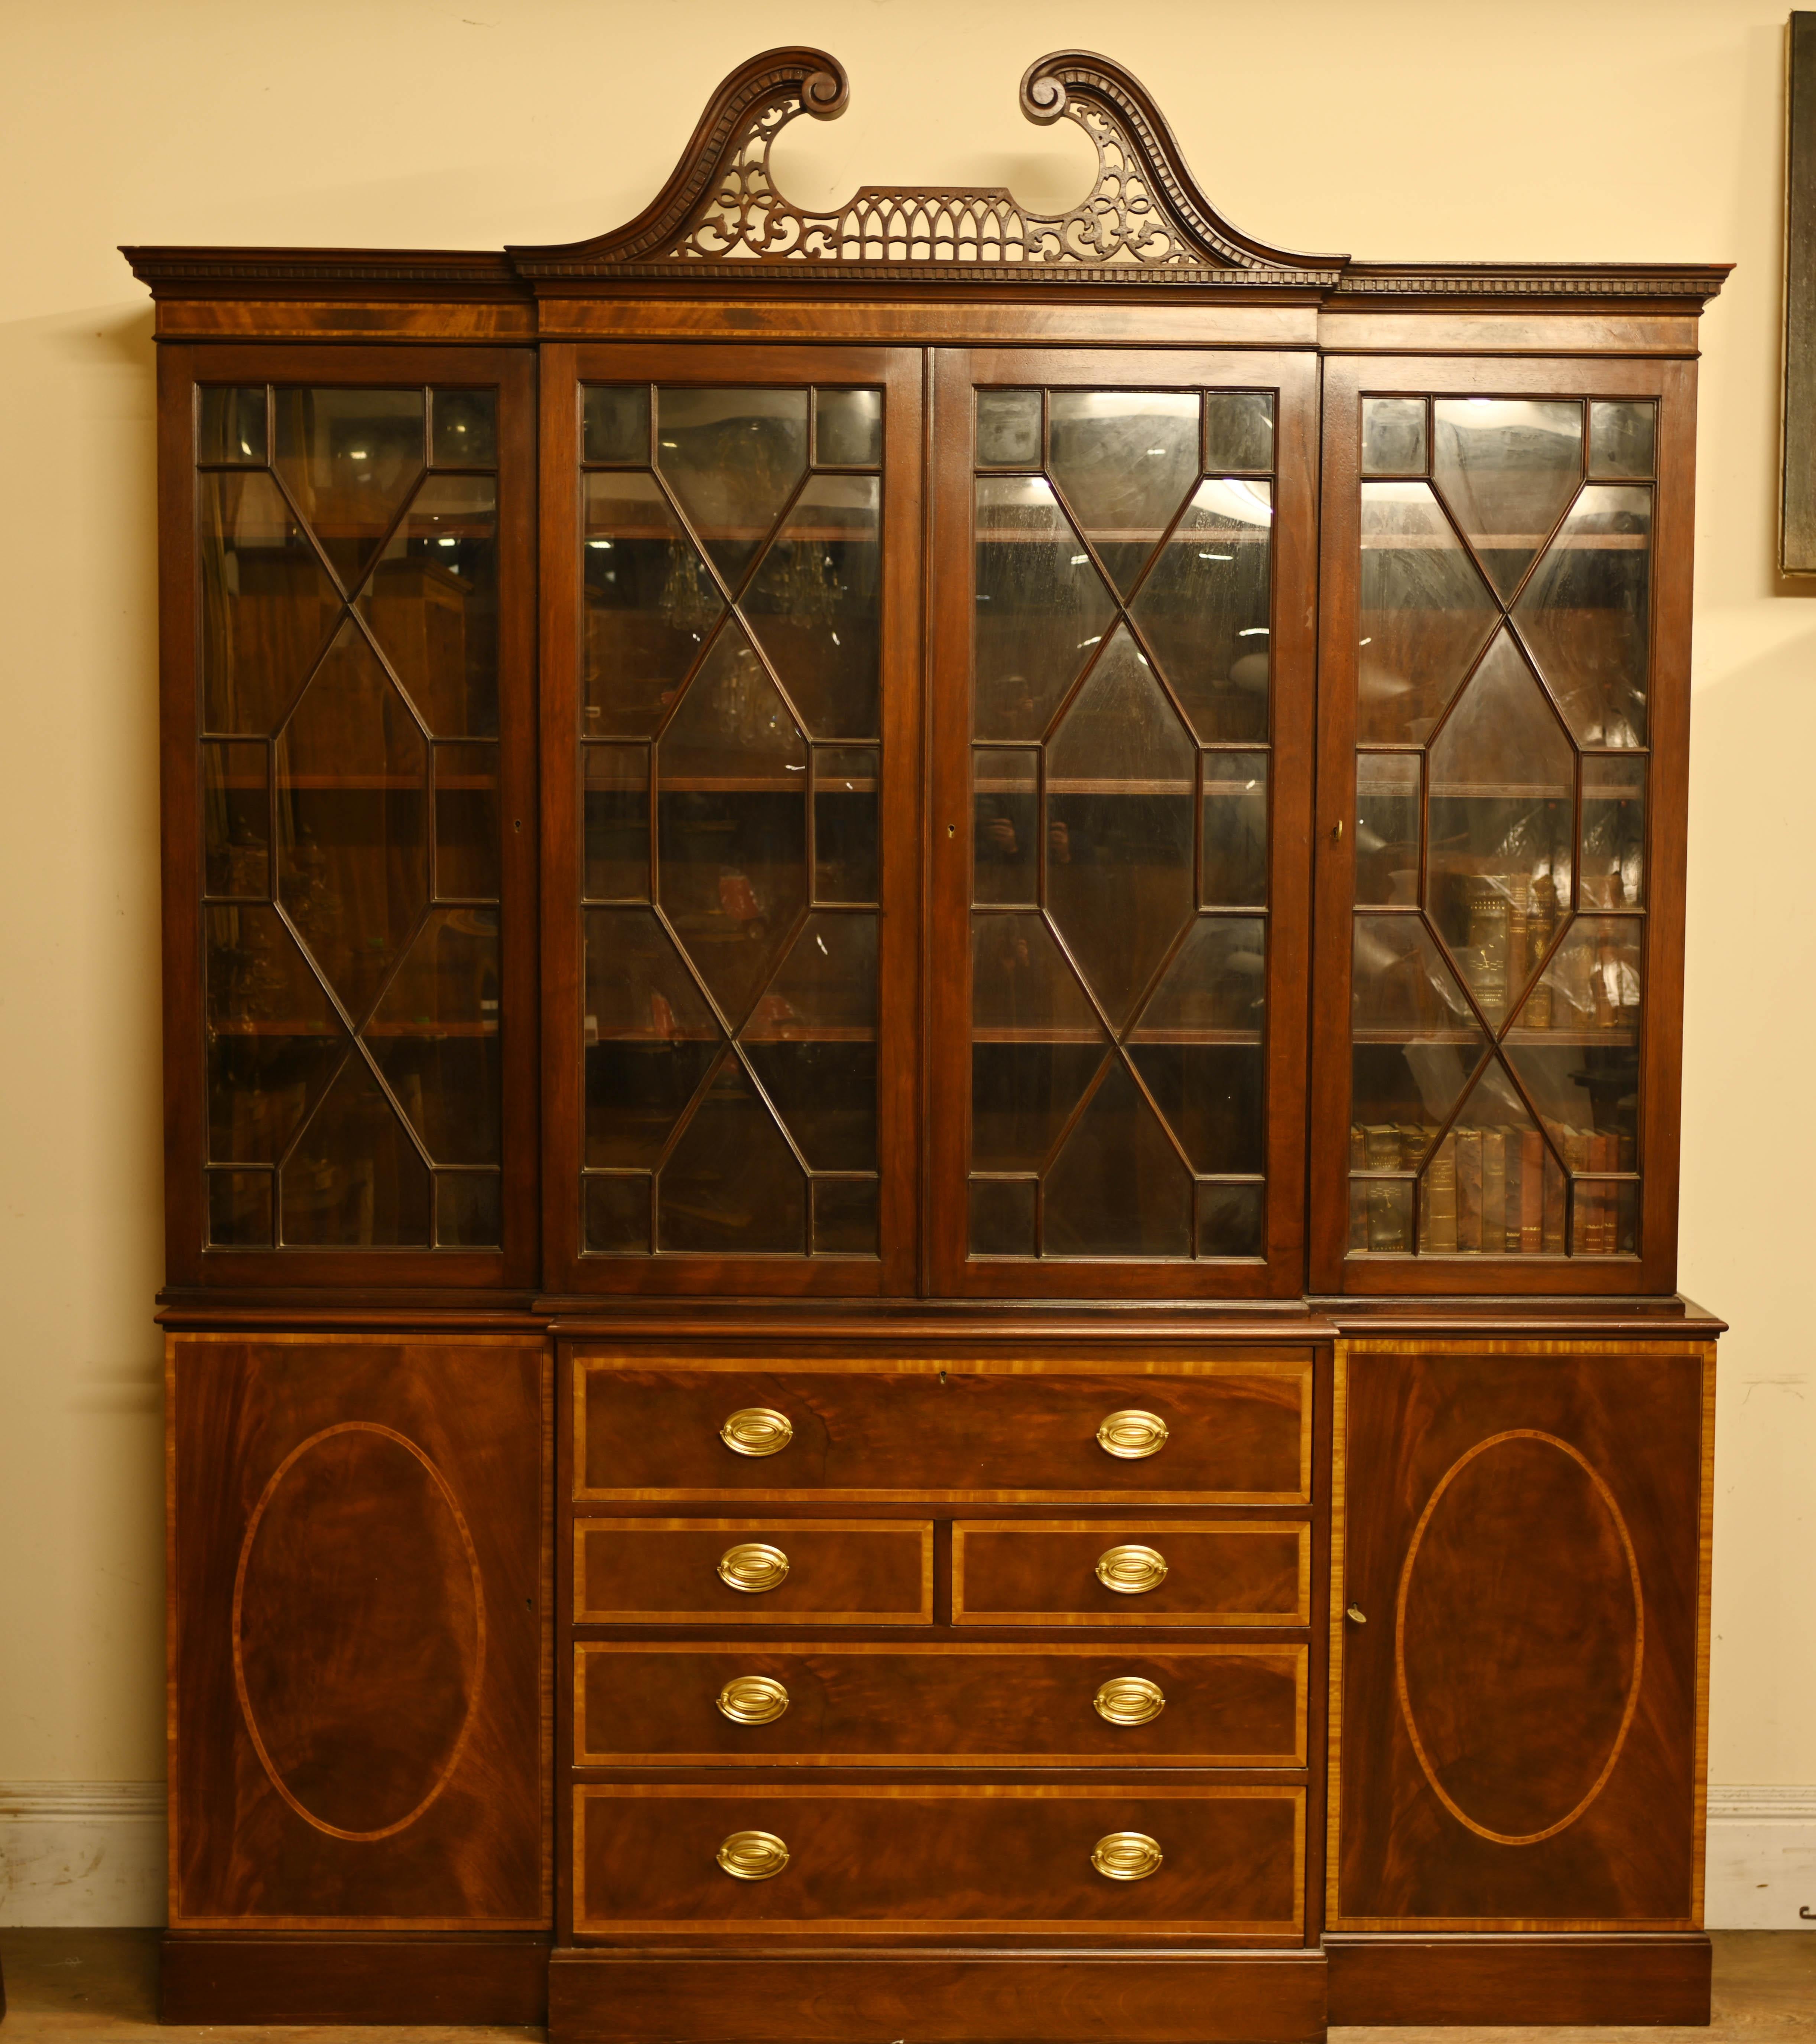 Elegant mahogany breakfront bookcase in the Sheraton manner
The piece is antique circa 1920
Features a secretaire pull out desk section in the middle
Lots of storage space on this refined piece of English furniture
Viewing by appointment